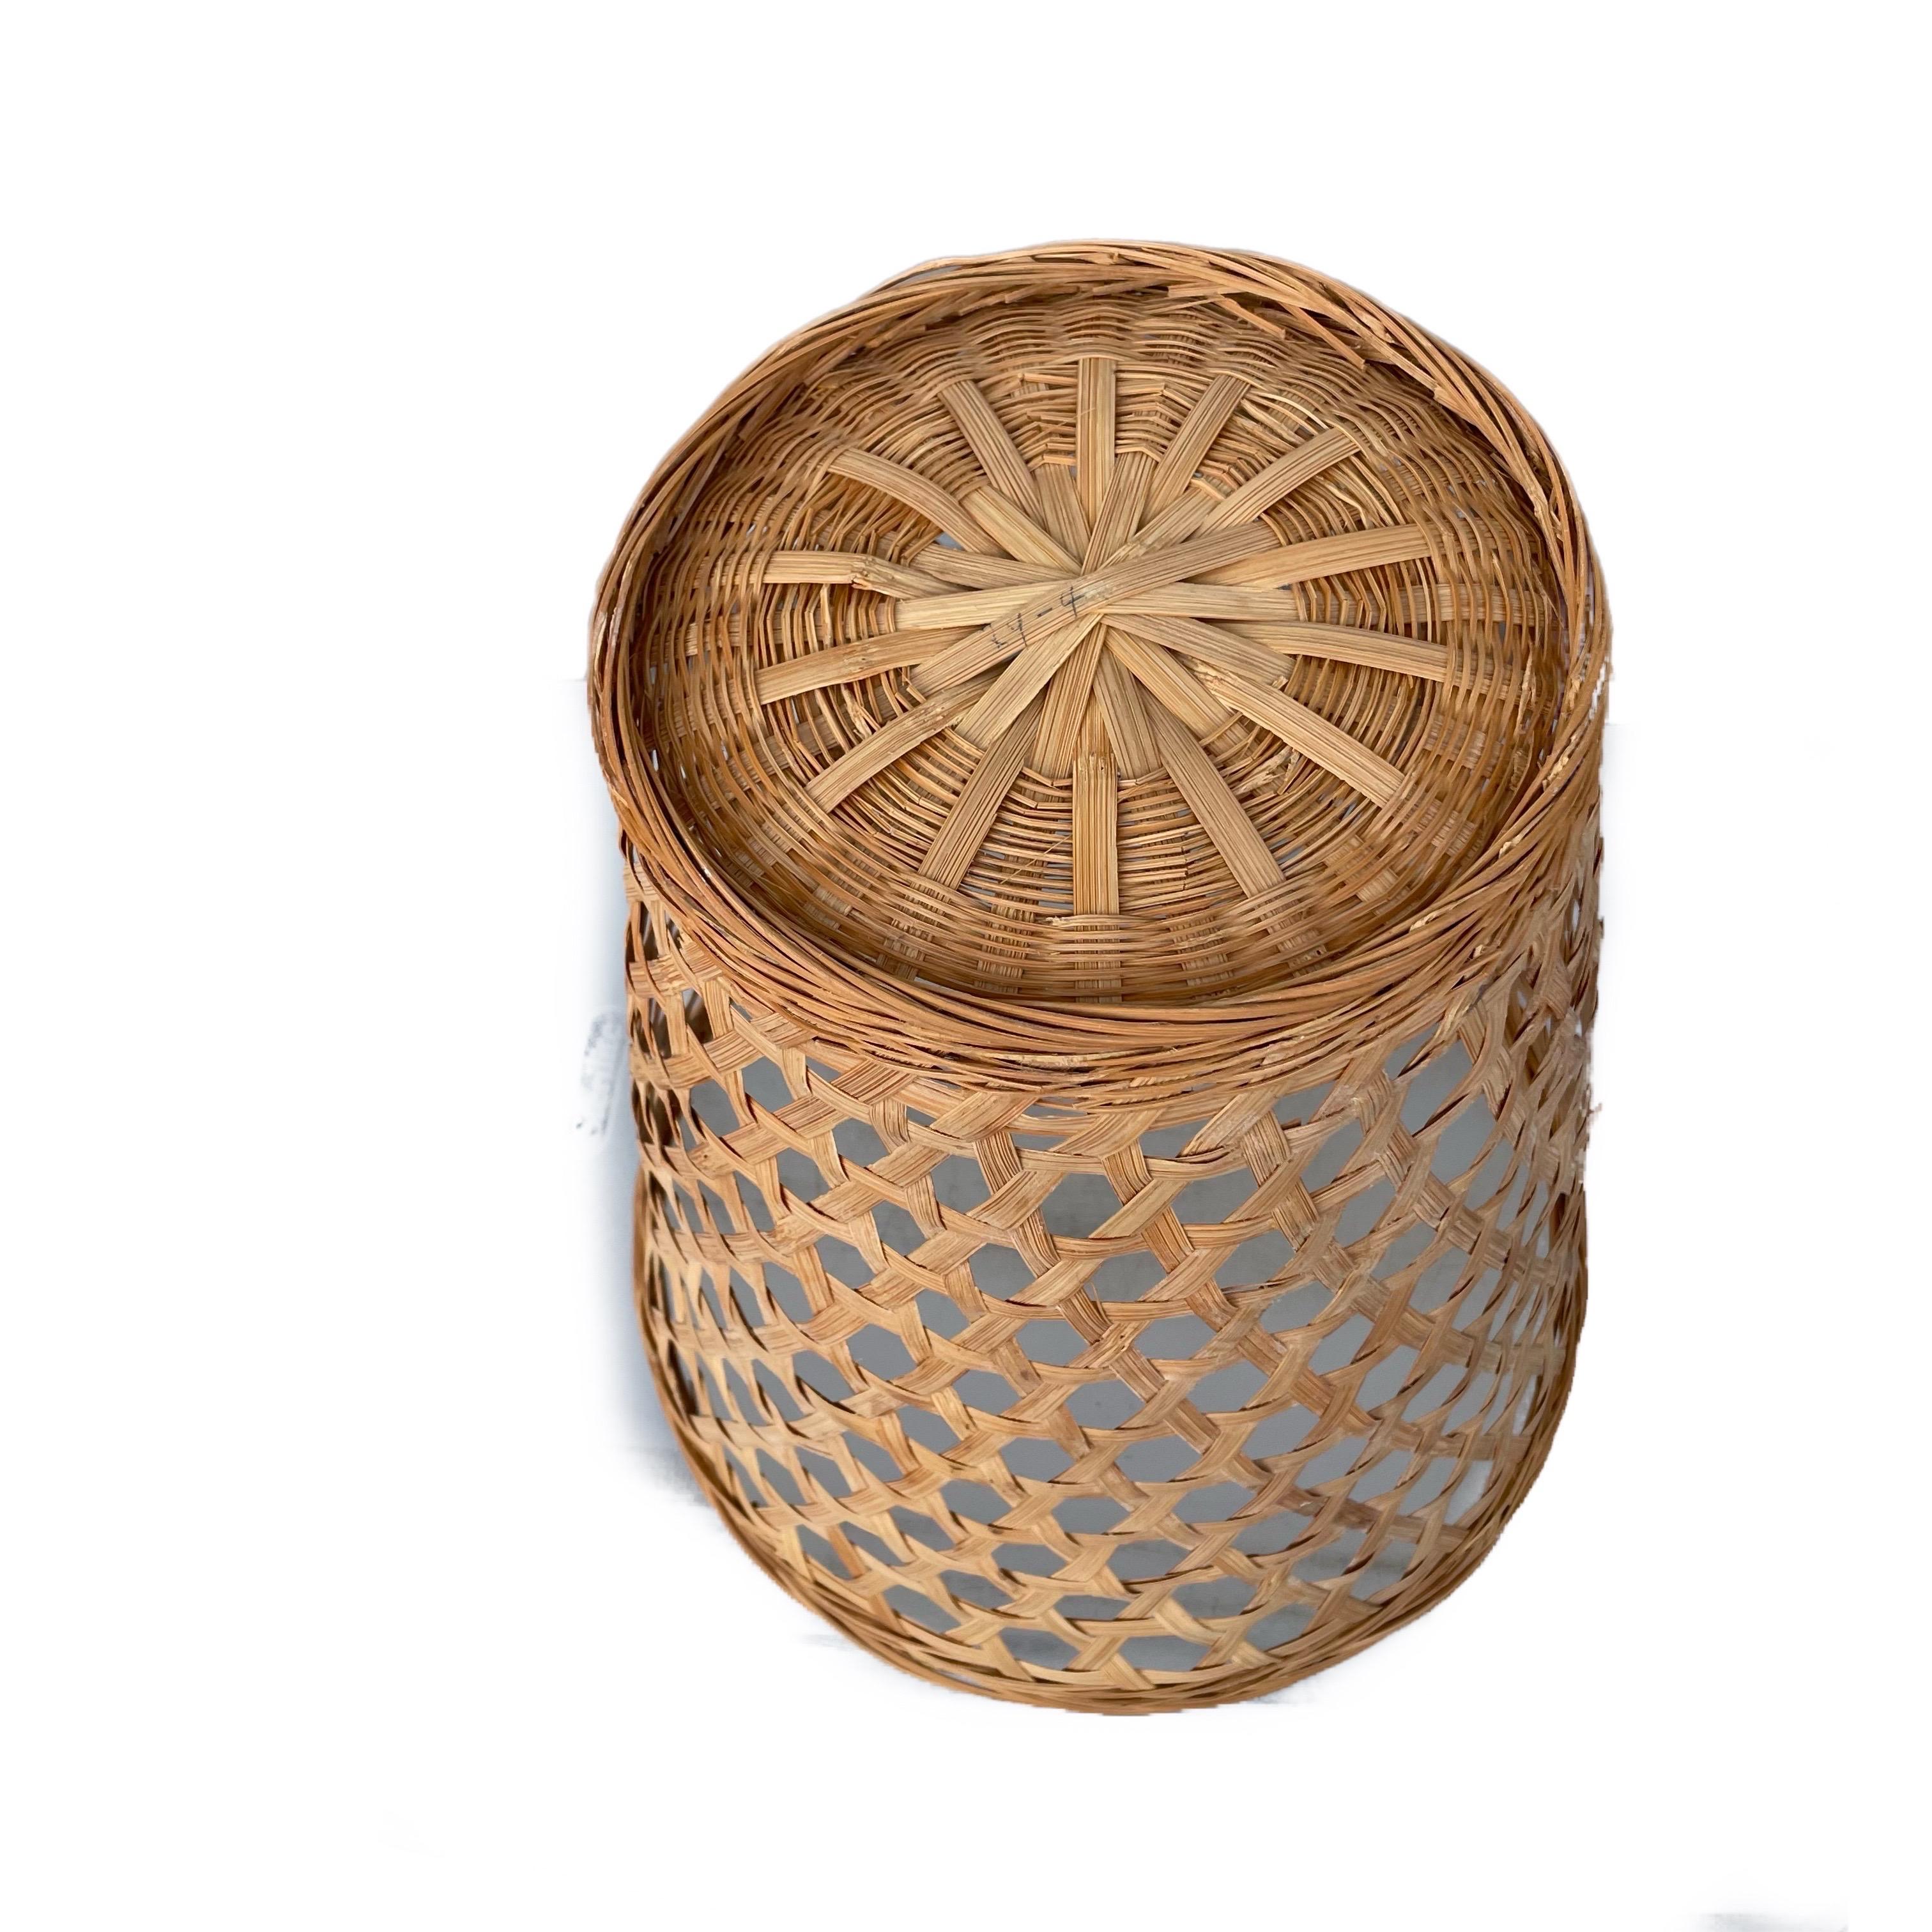 Philippine 20th Century Open Weave Wicker Wastebasket or Trash Can For Sale